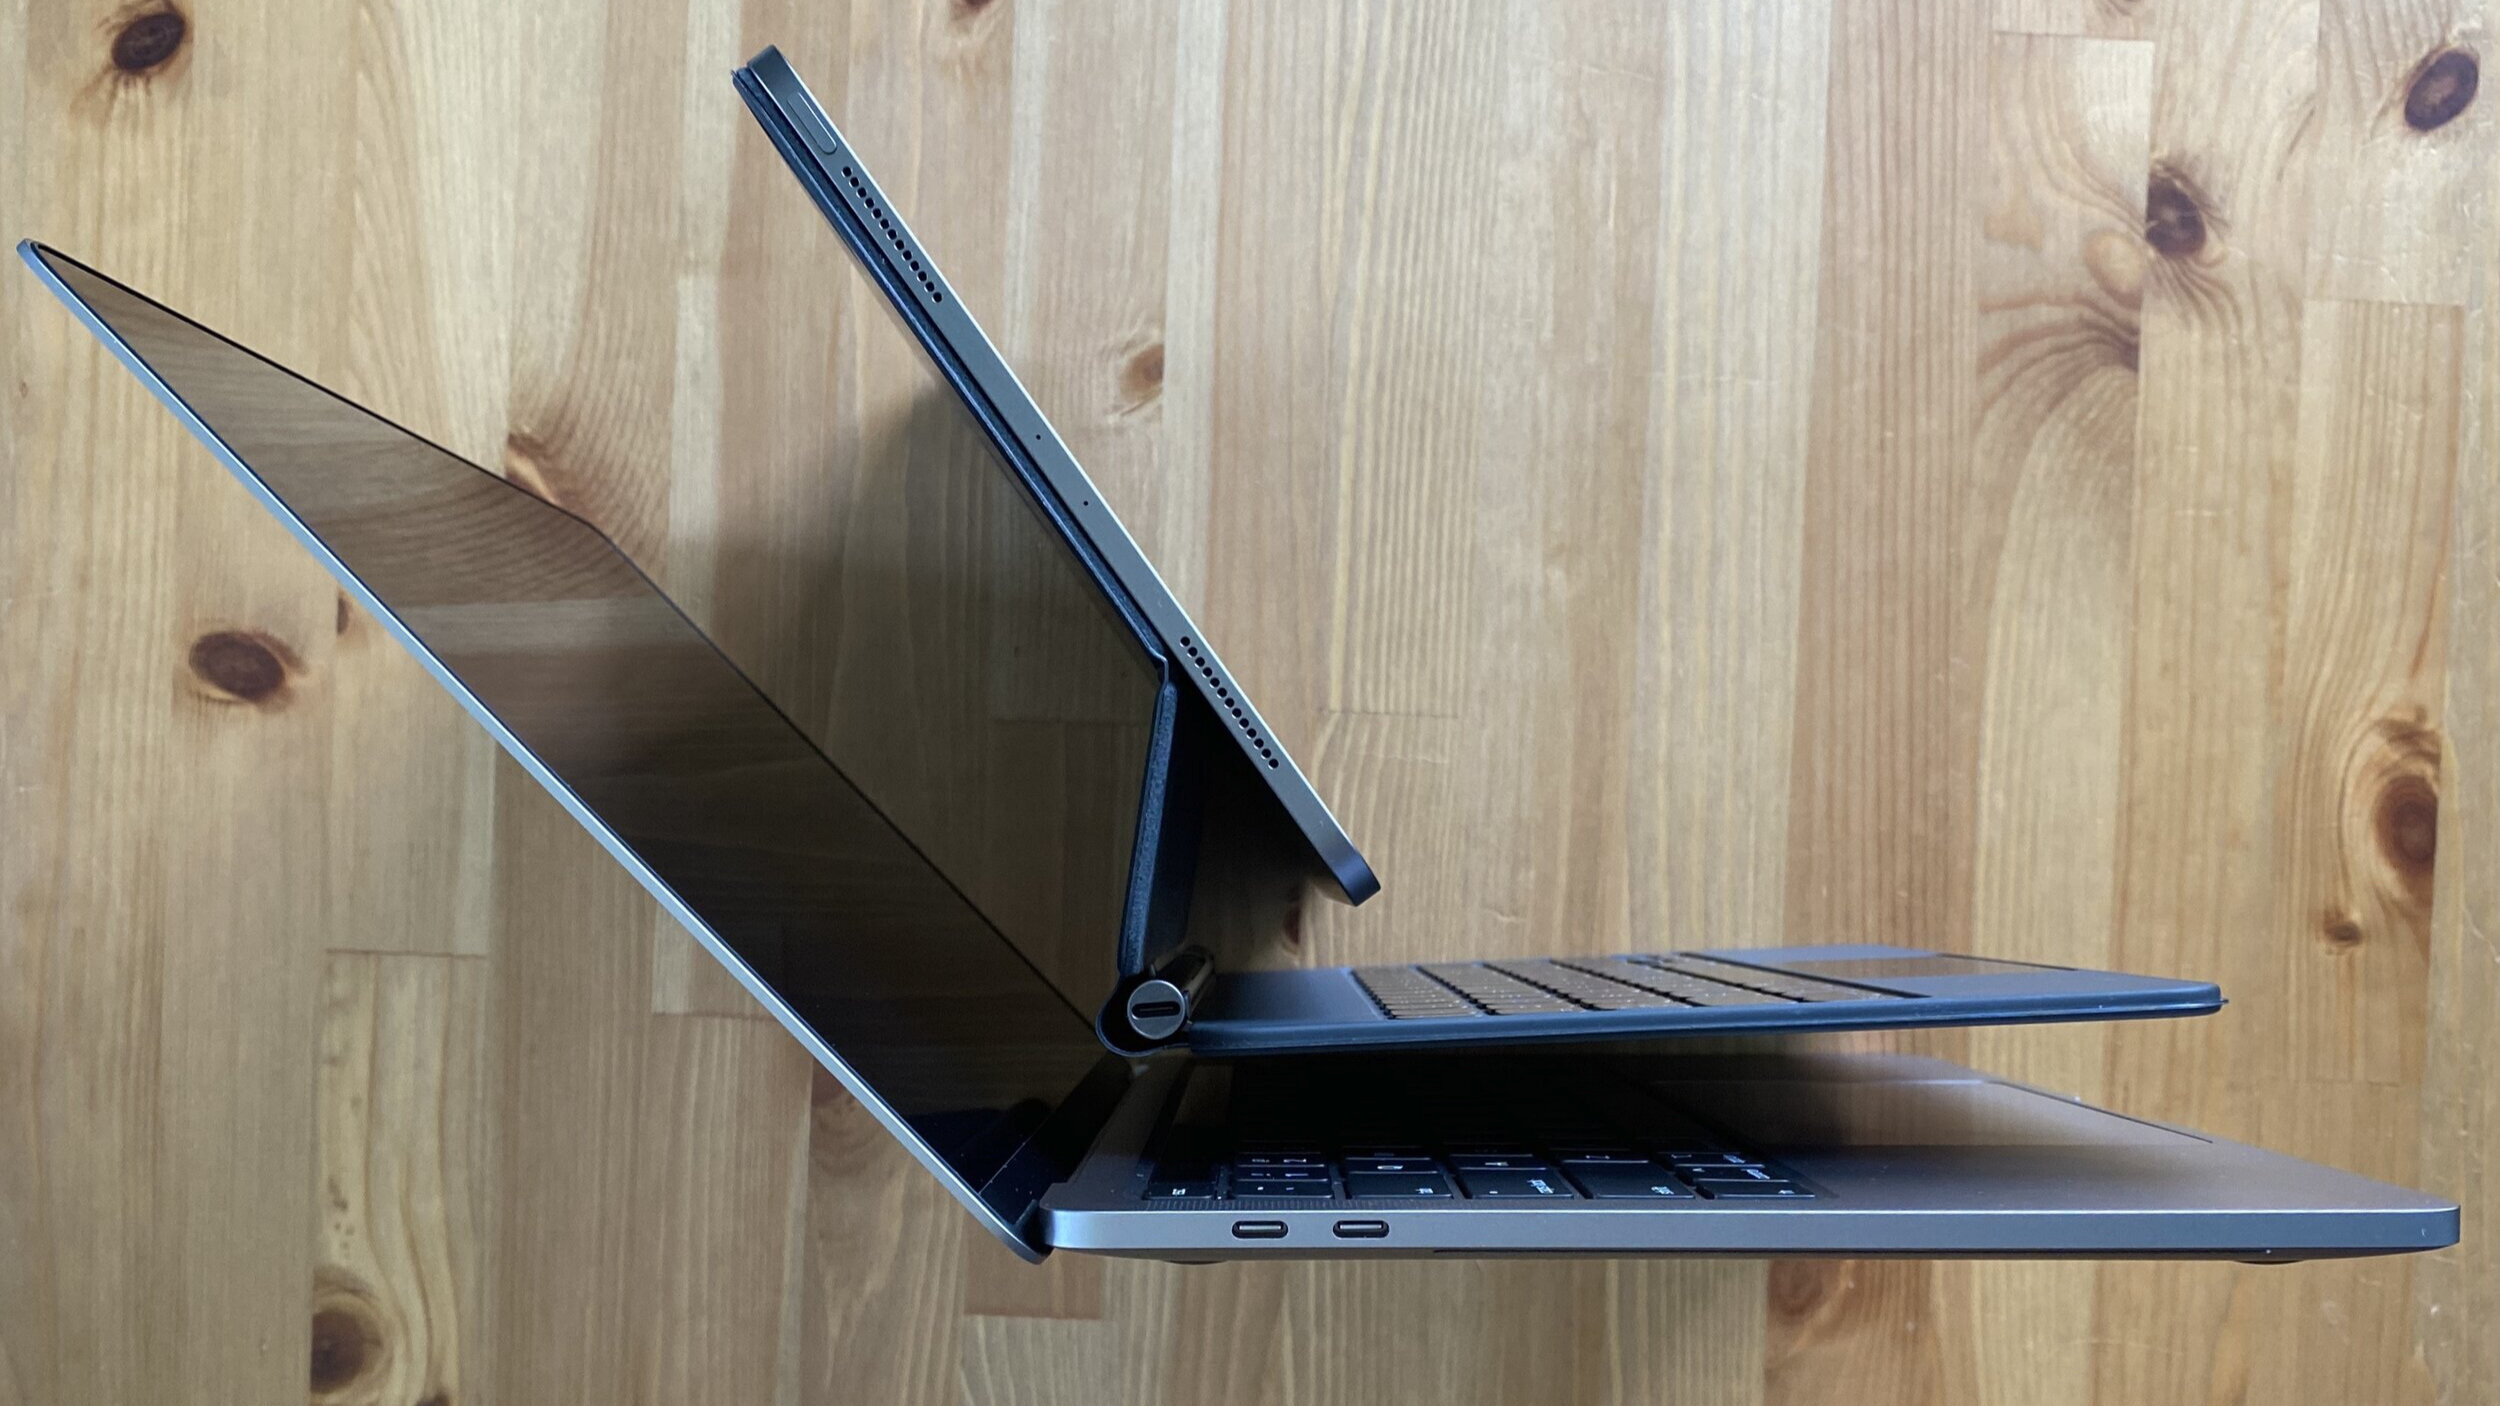 Comaring the hinge against a MacBook Pro